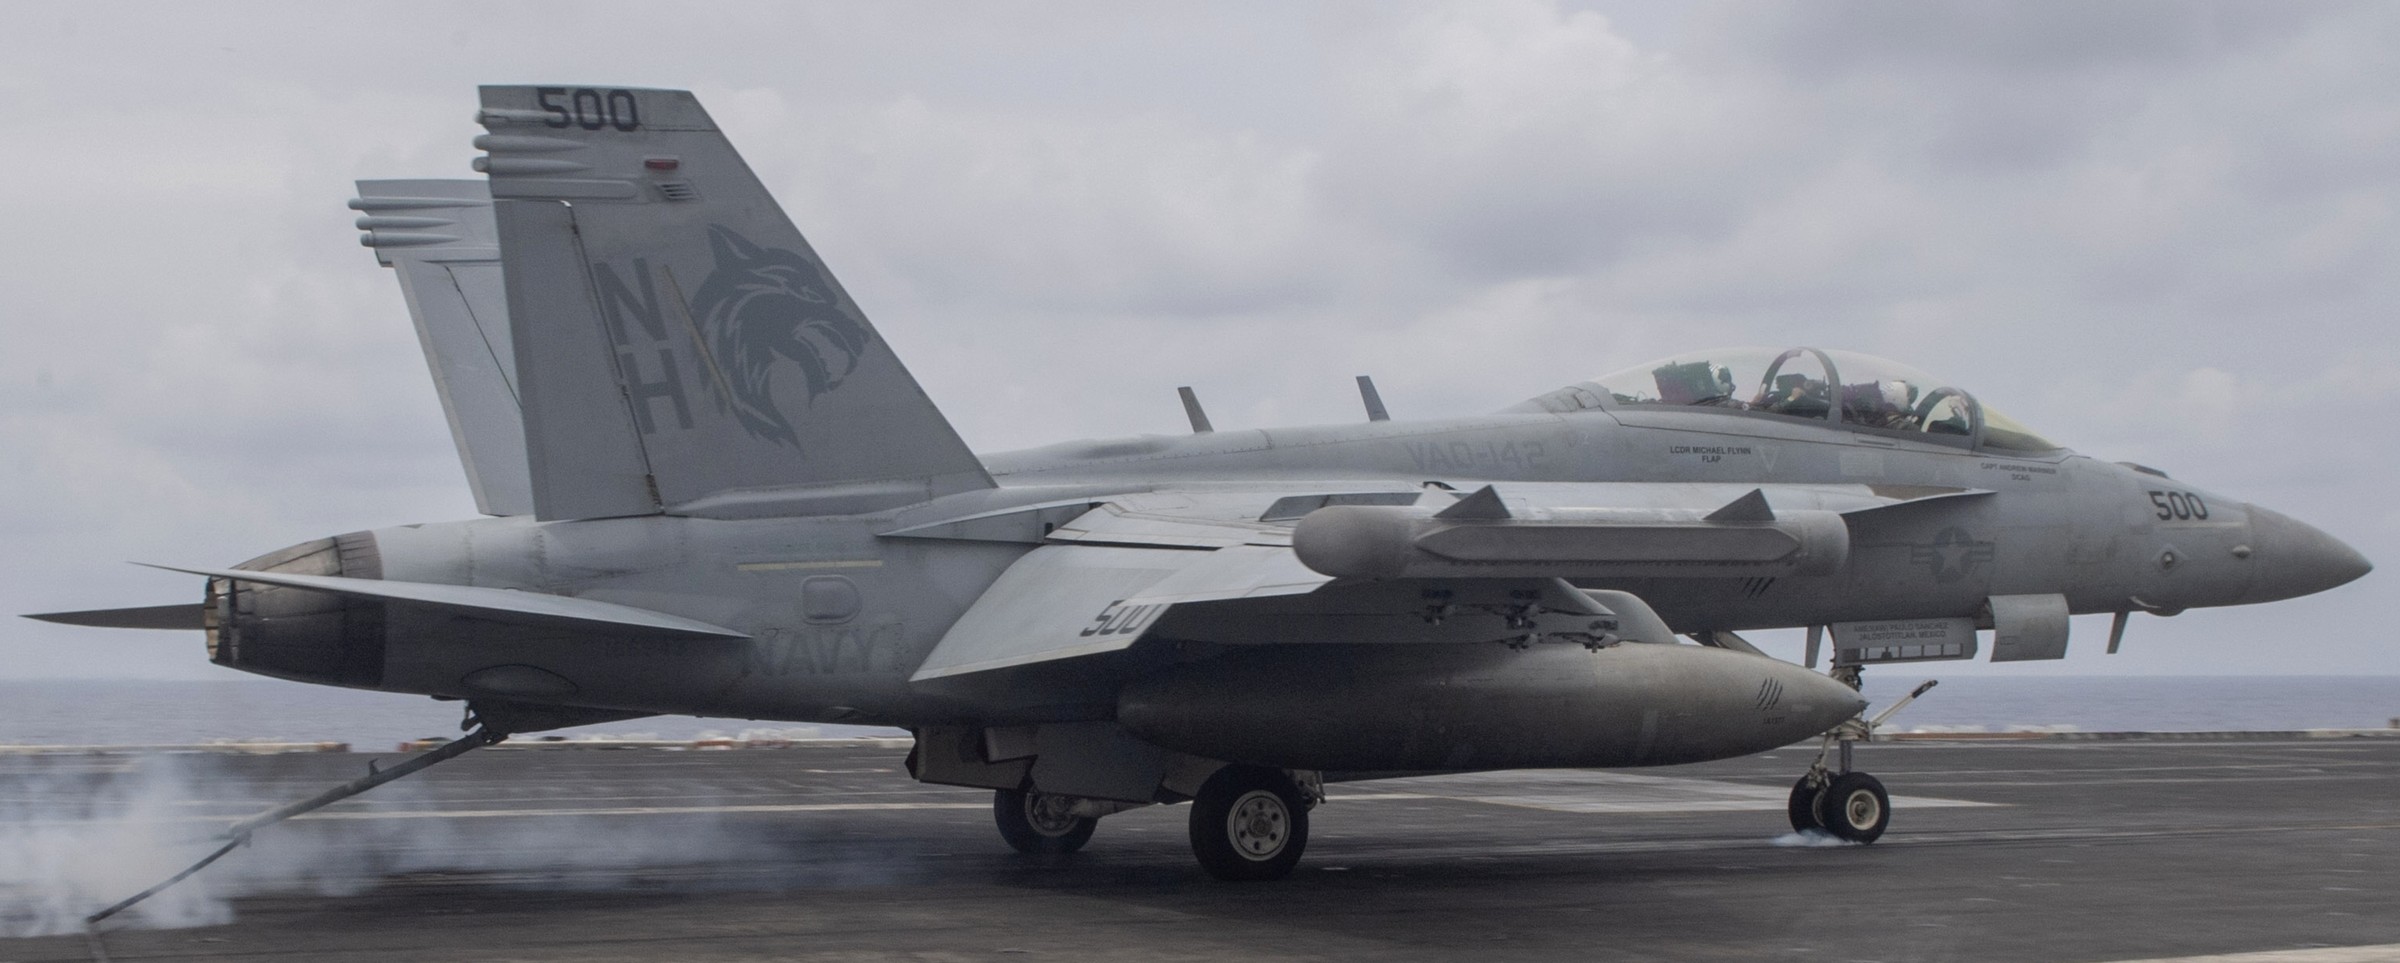 vaq-142 gray wolves electronic attack squadron ea-18g growler us navy cvw-11 uss theodore roosevelt cvn-71 112